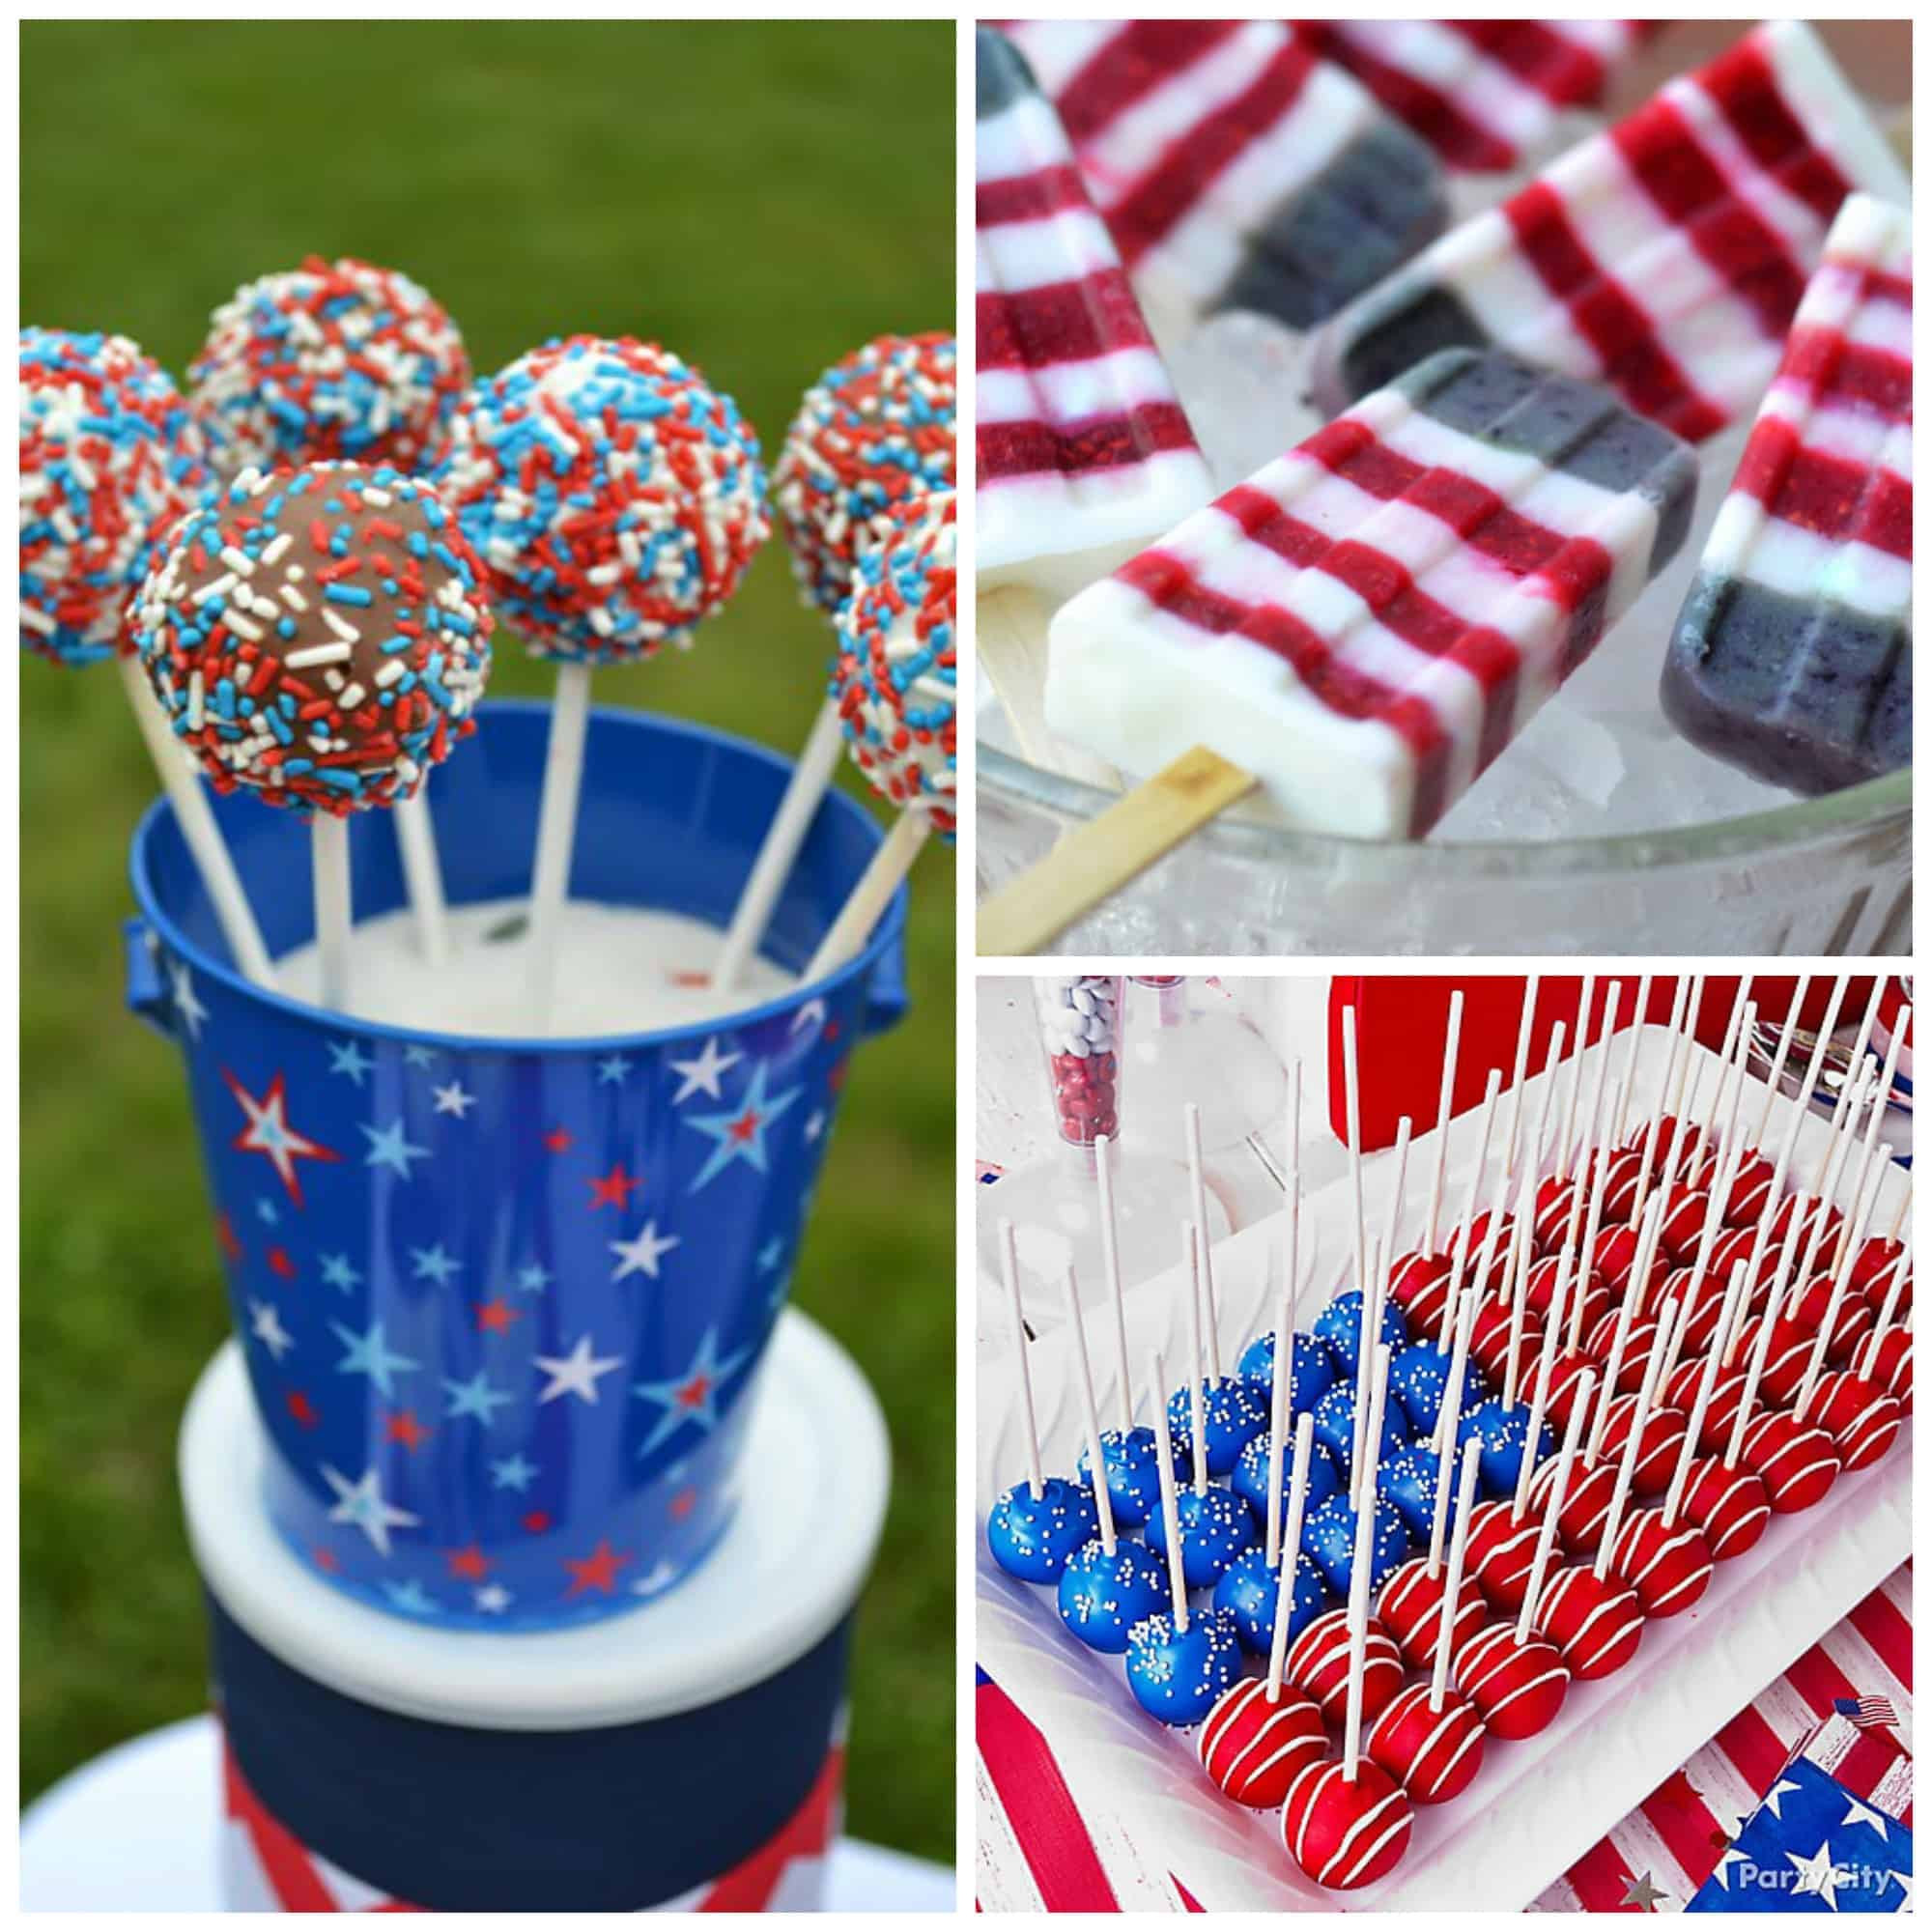 Memorial Day Ideas
 10 Amazing Memorial Day Party Ideas · Life of a Homebody